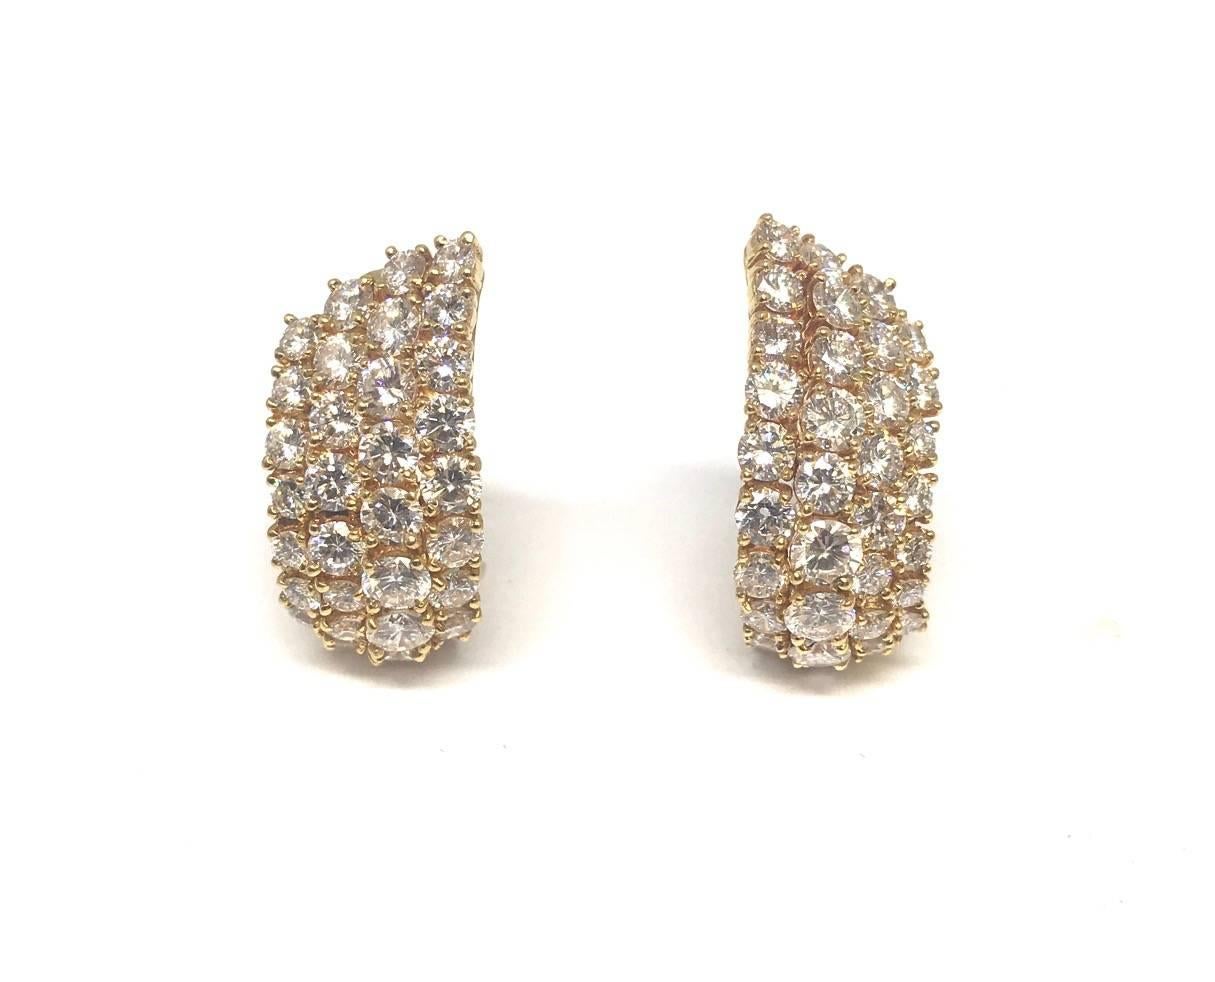 Stunning and very elegant these Cartier Fan earrings have it all.
This high end piece of jewelry is made in 18k Yellow gold with over 10 ct of the purest diamonds. 
Perfect for an evening out or day time if you really want to make a statement.